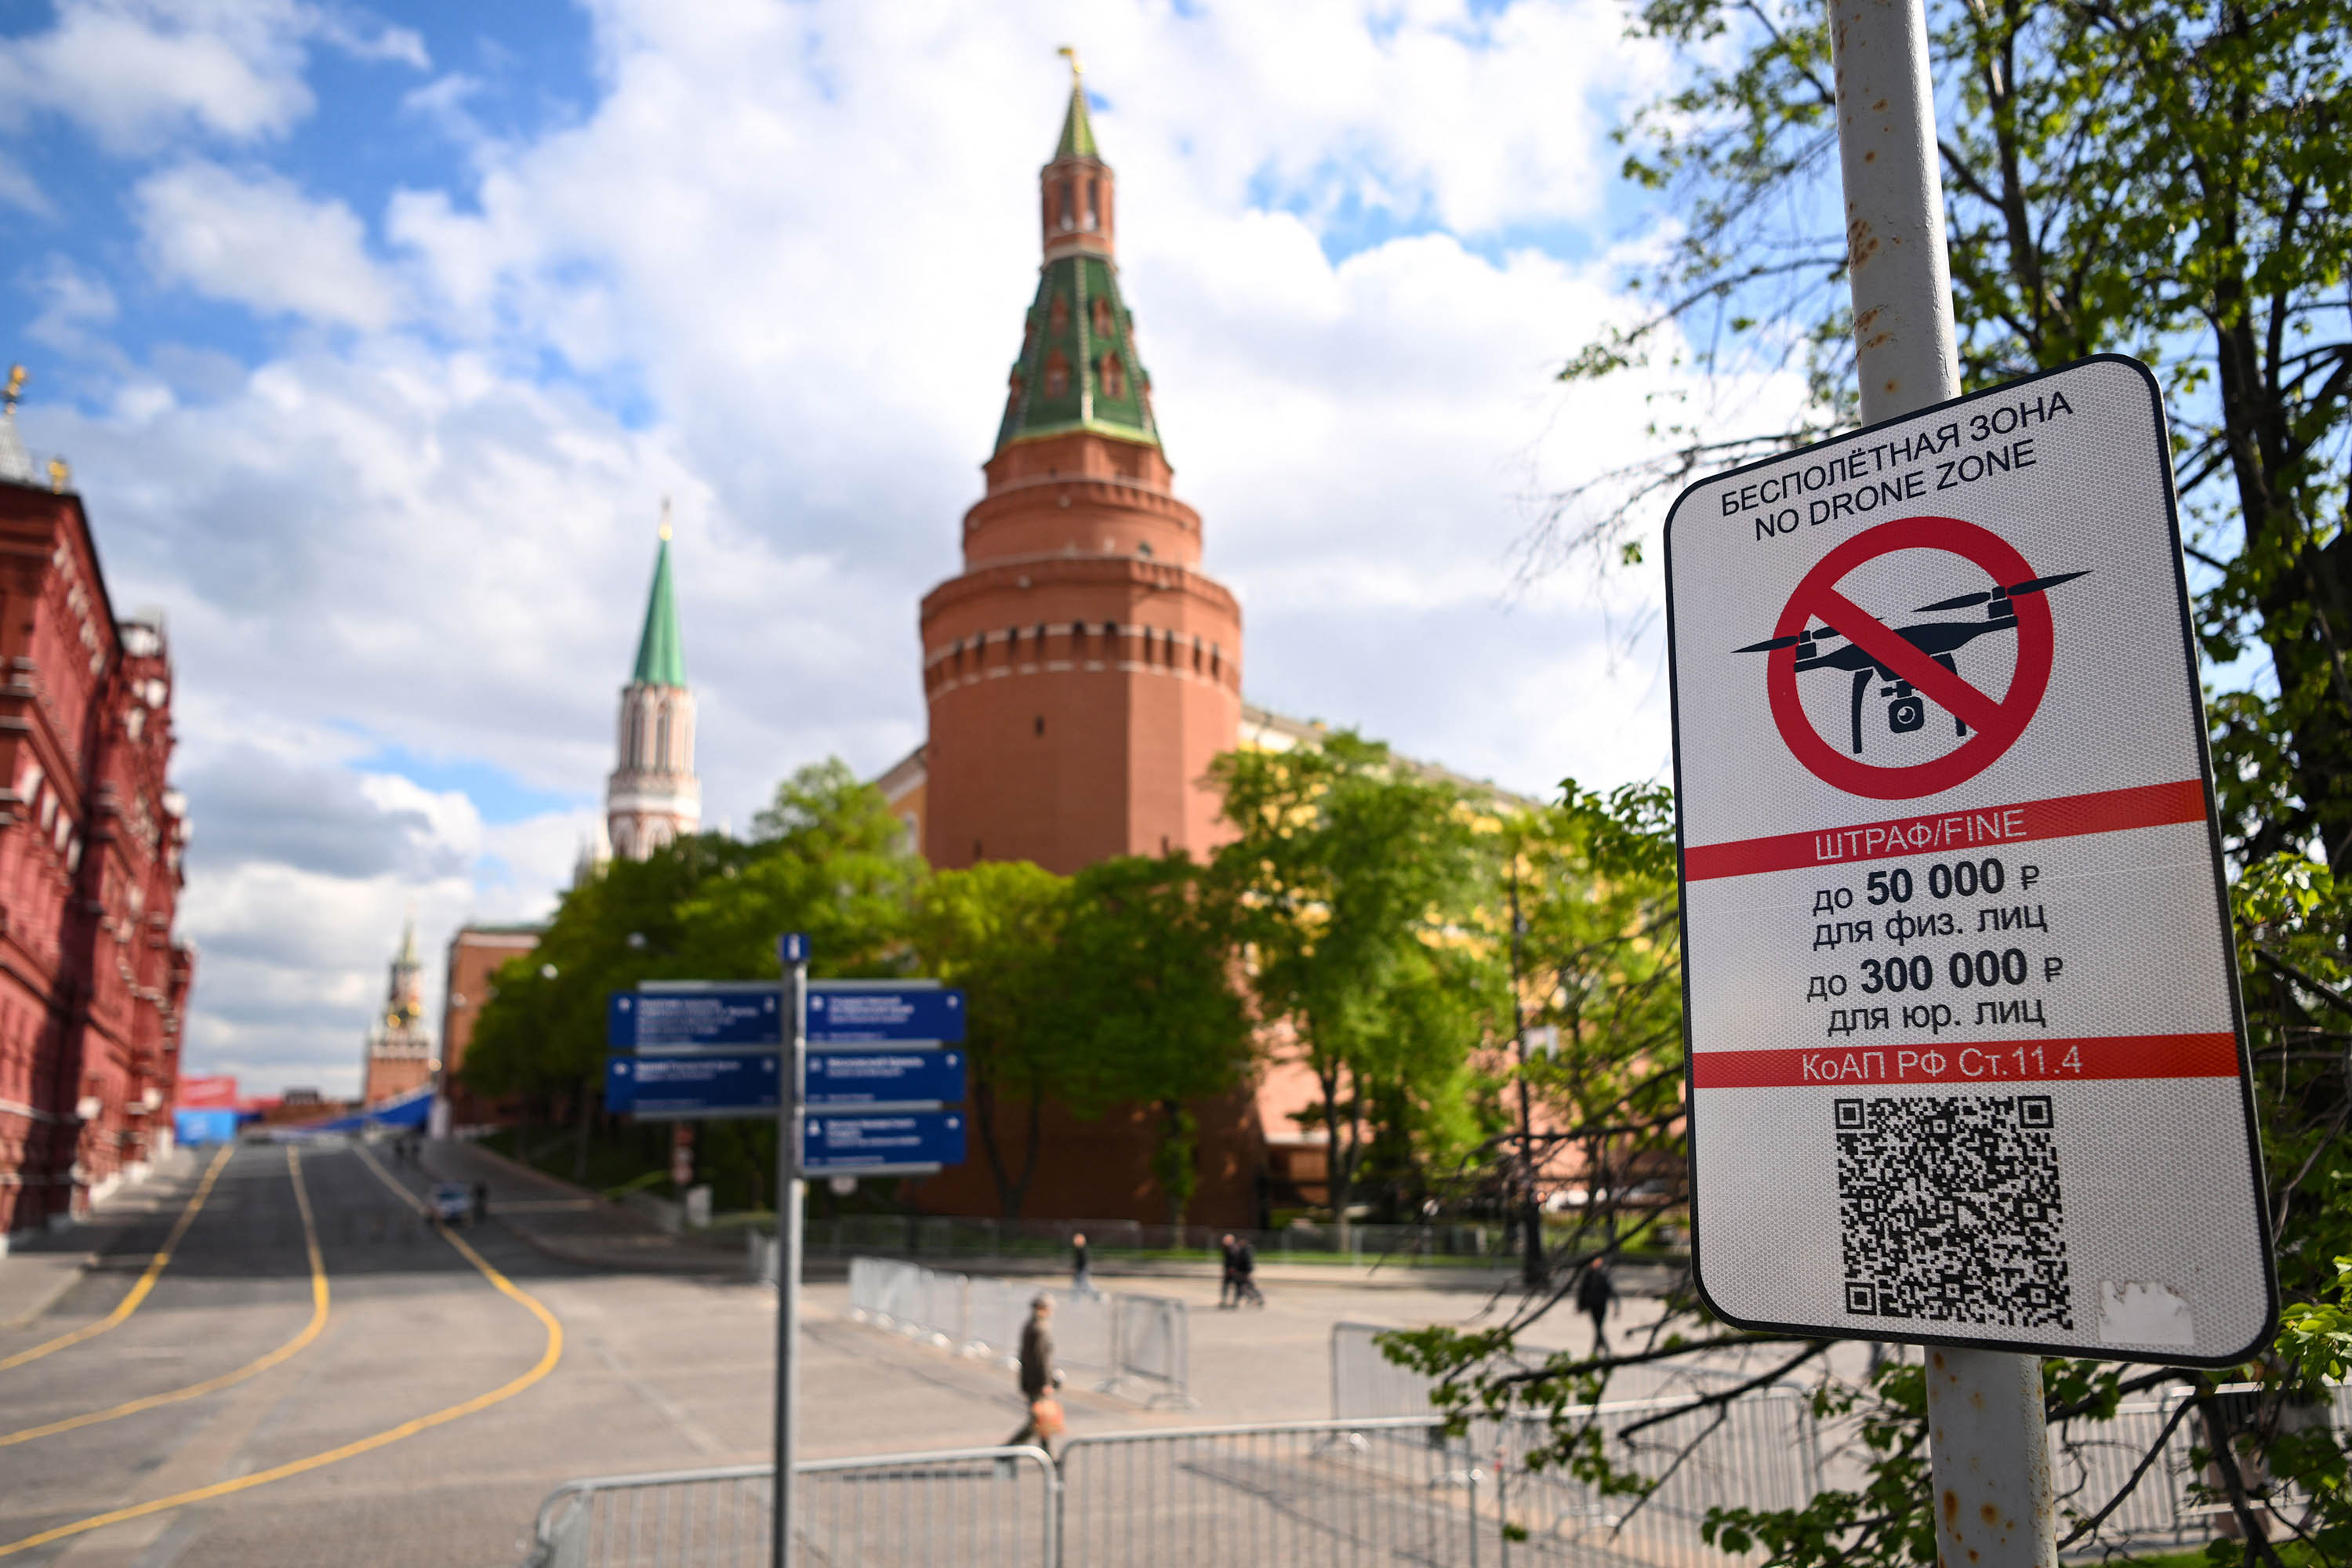 A sign prohibiting drones is pictured near the Kremlin in Moscow, on May 3.